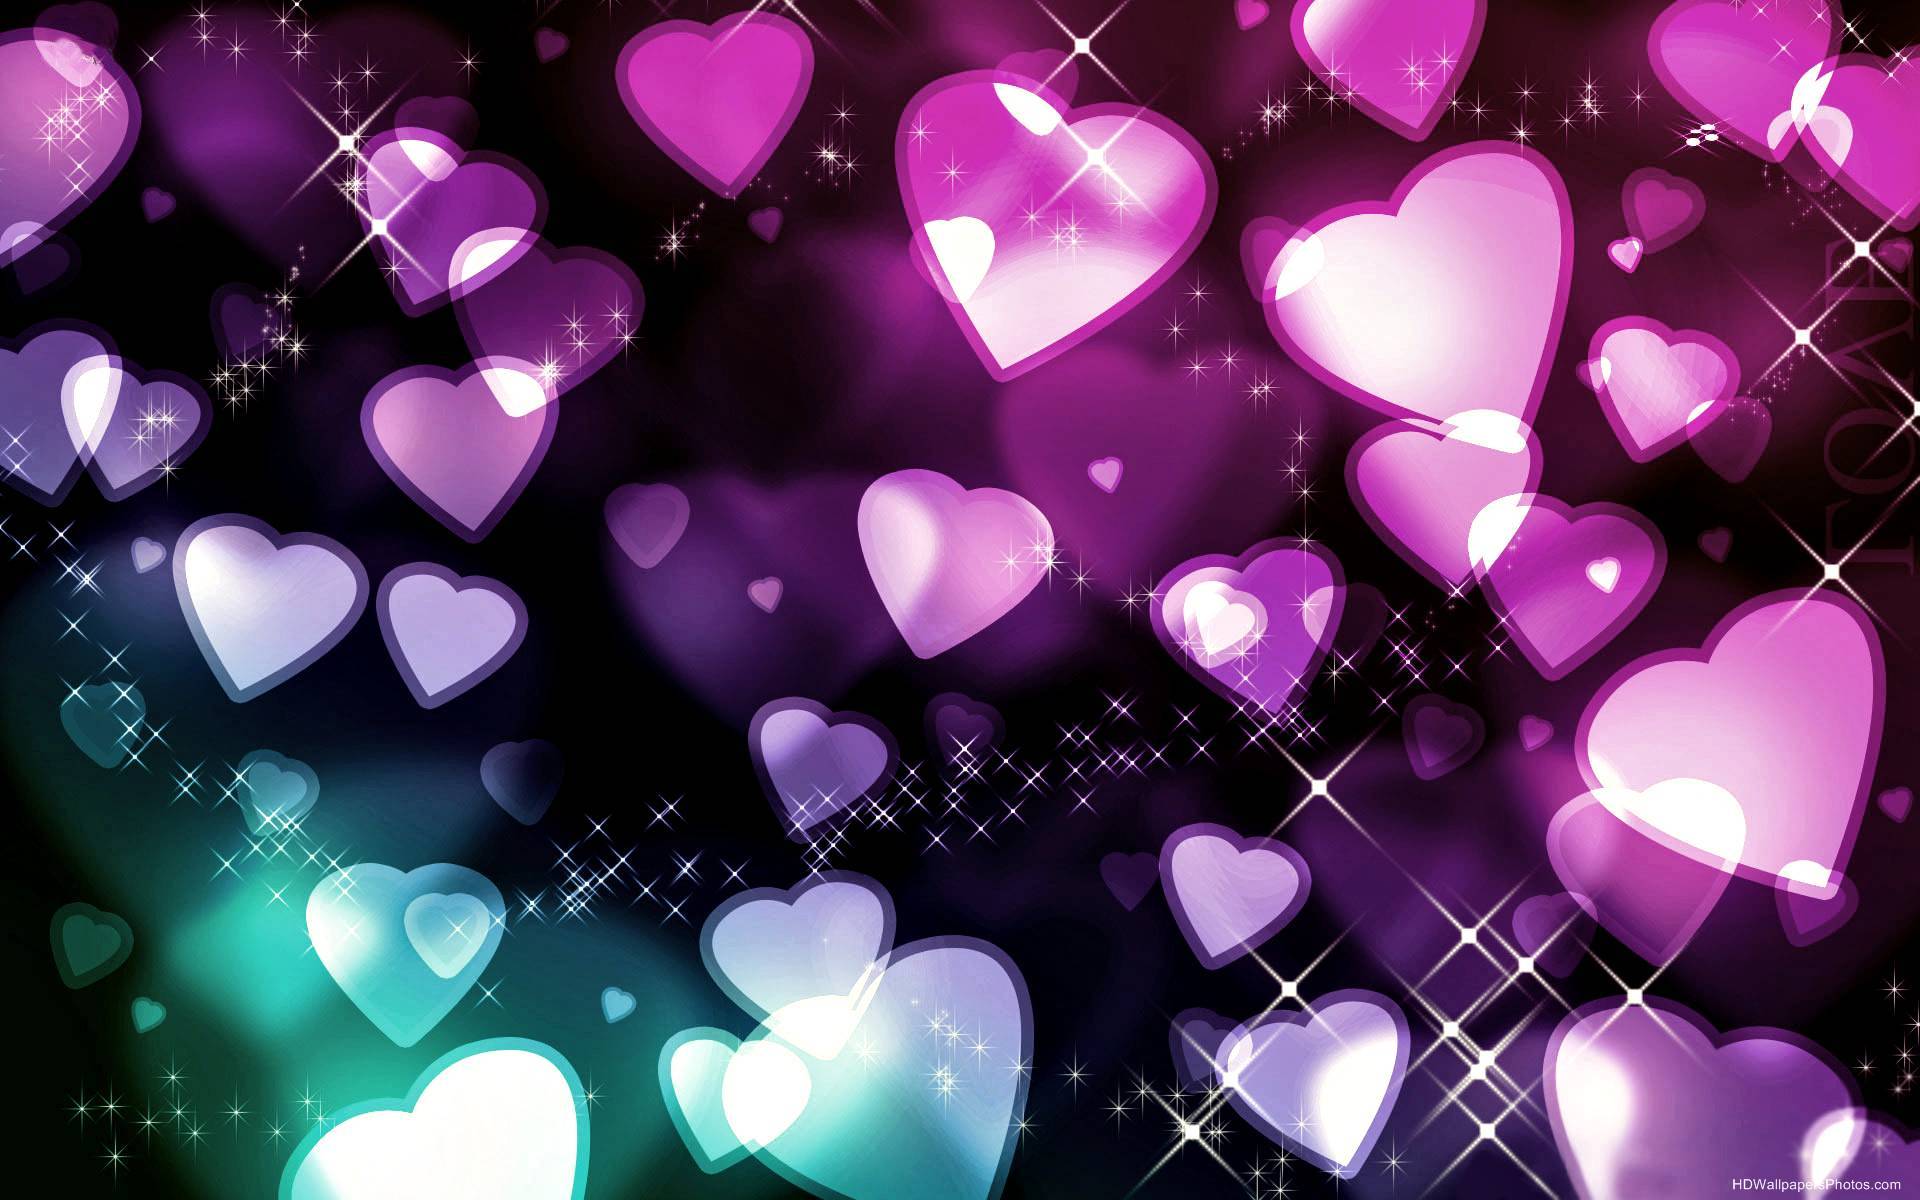 Colorful Hearts HD Wallpaper Image Pictures